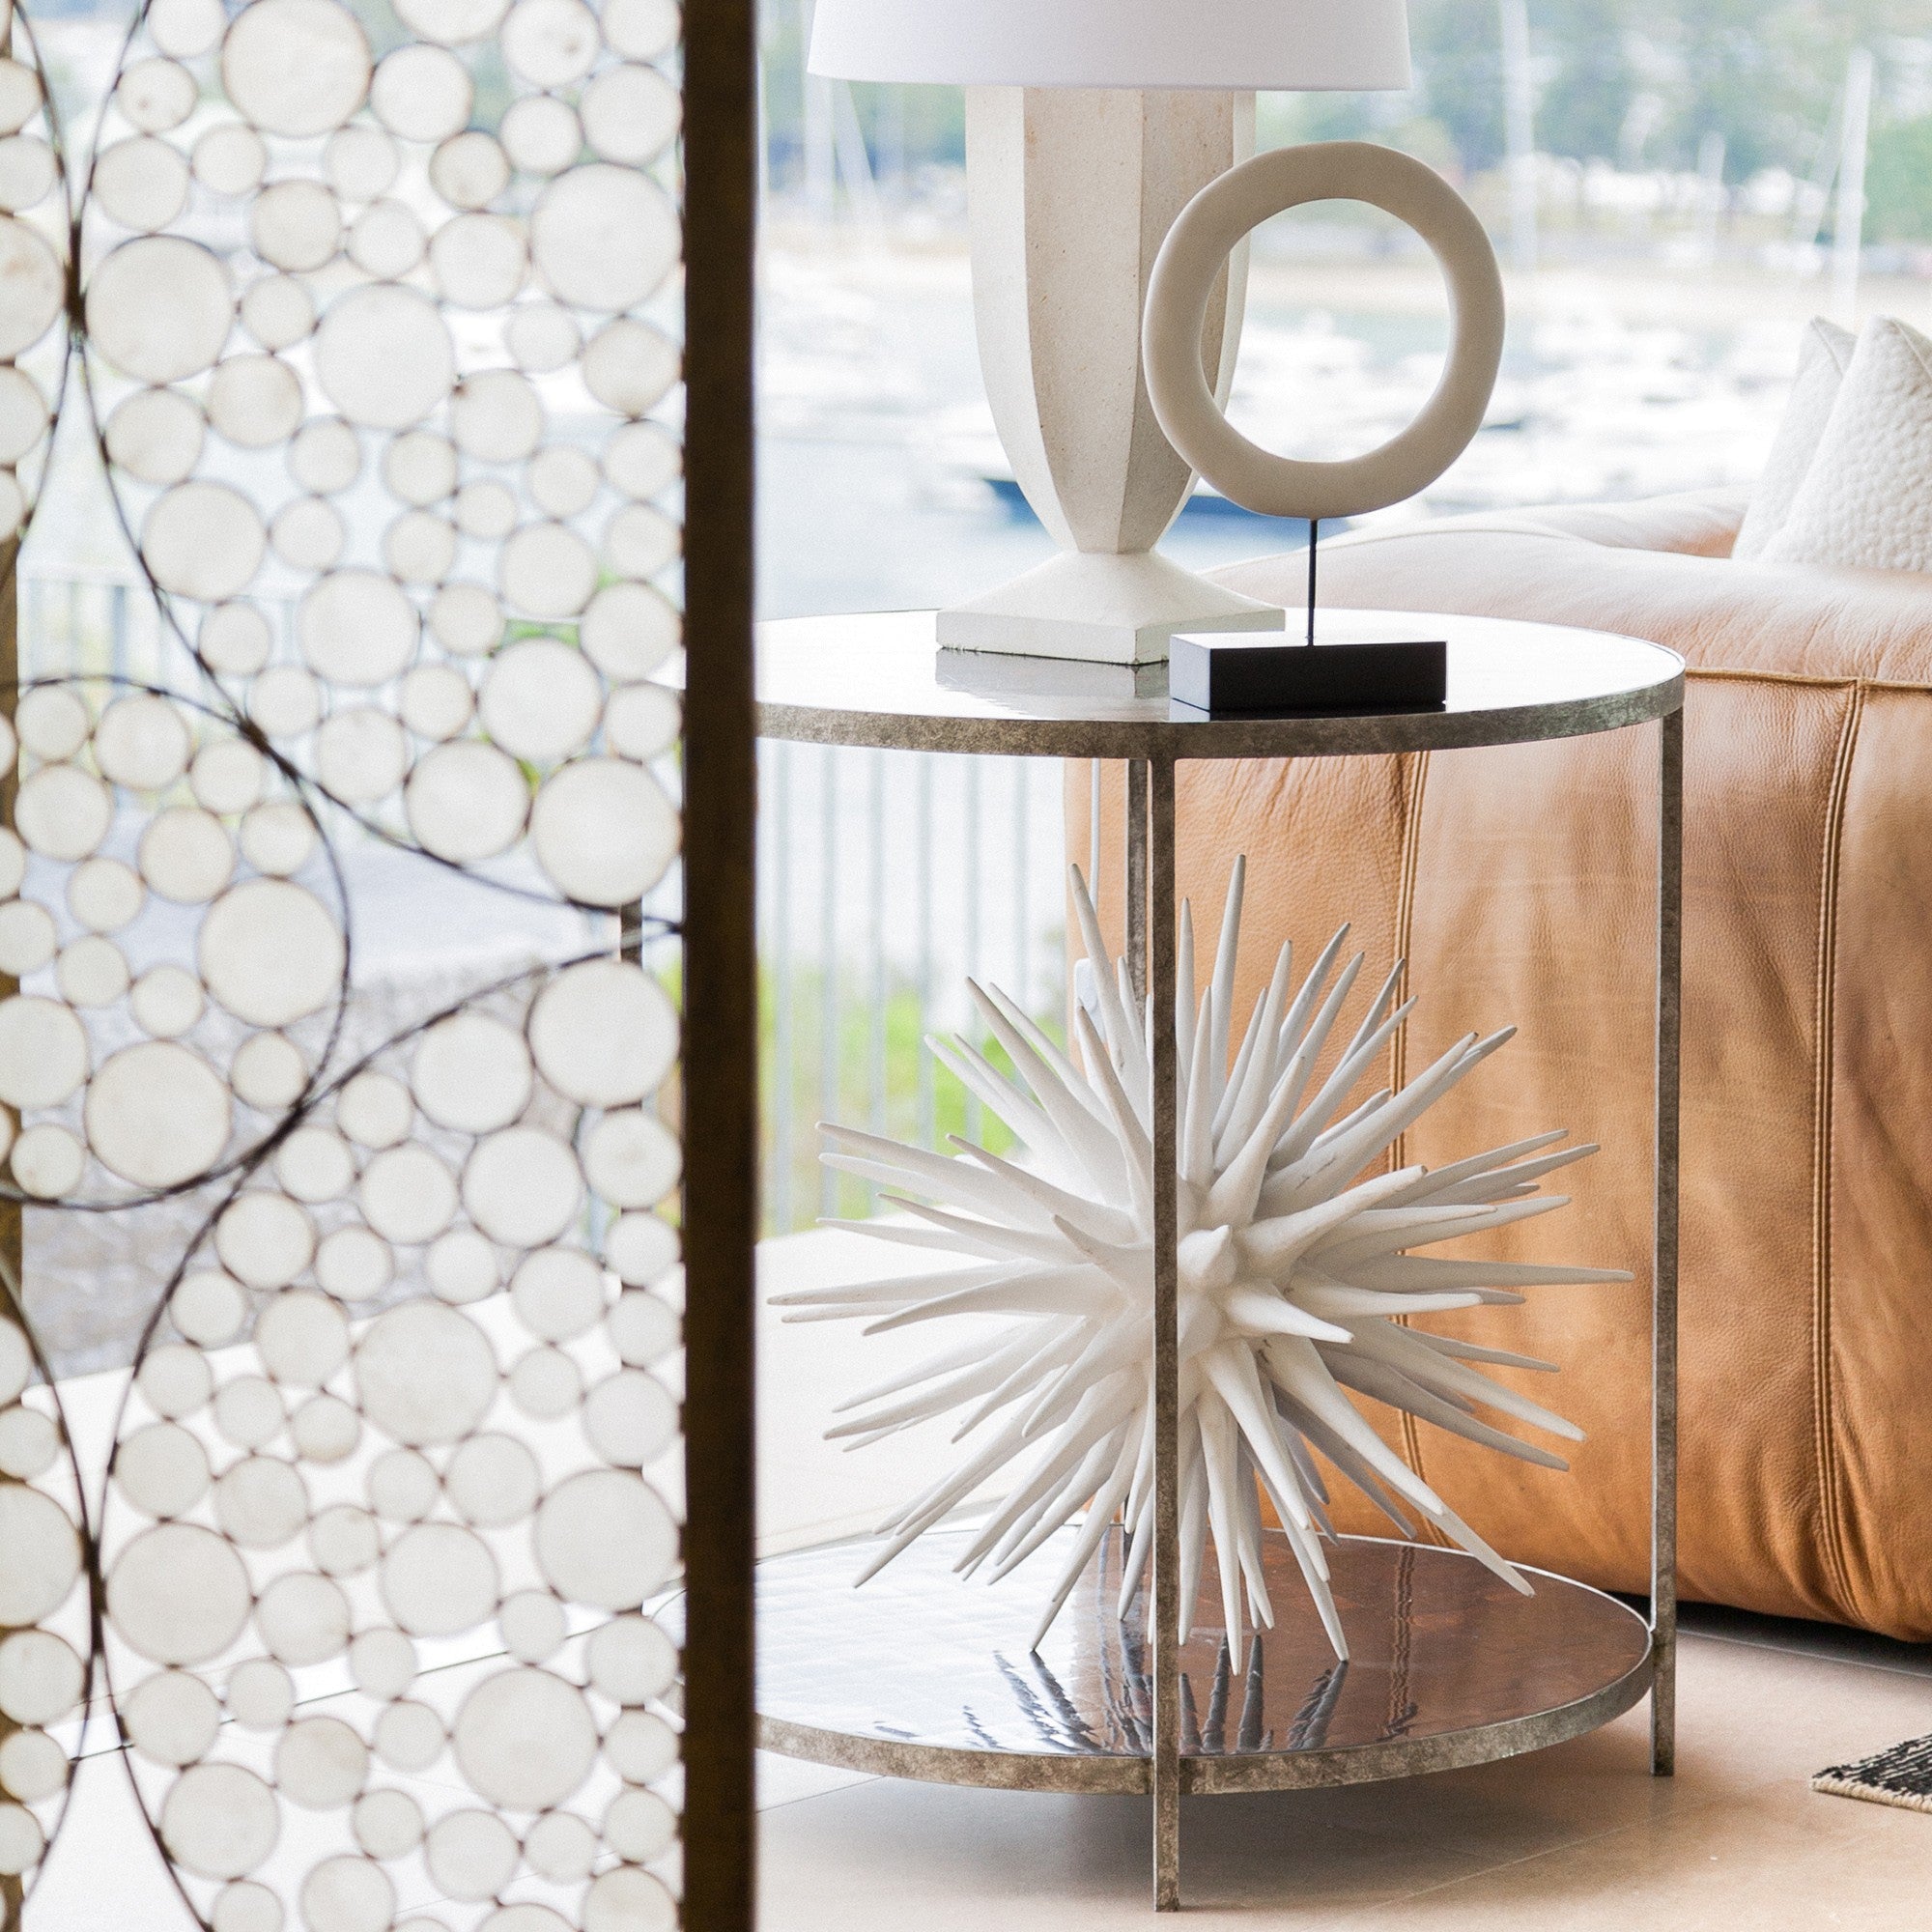 large sea urchin sculpture used as decor on side table